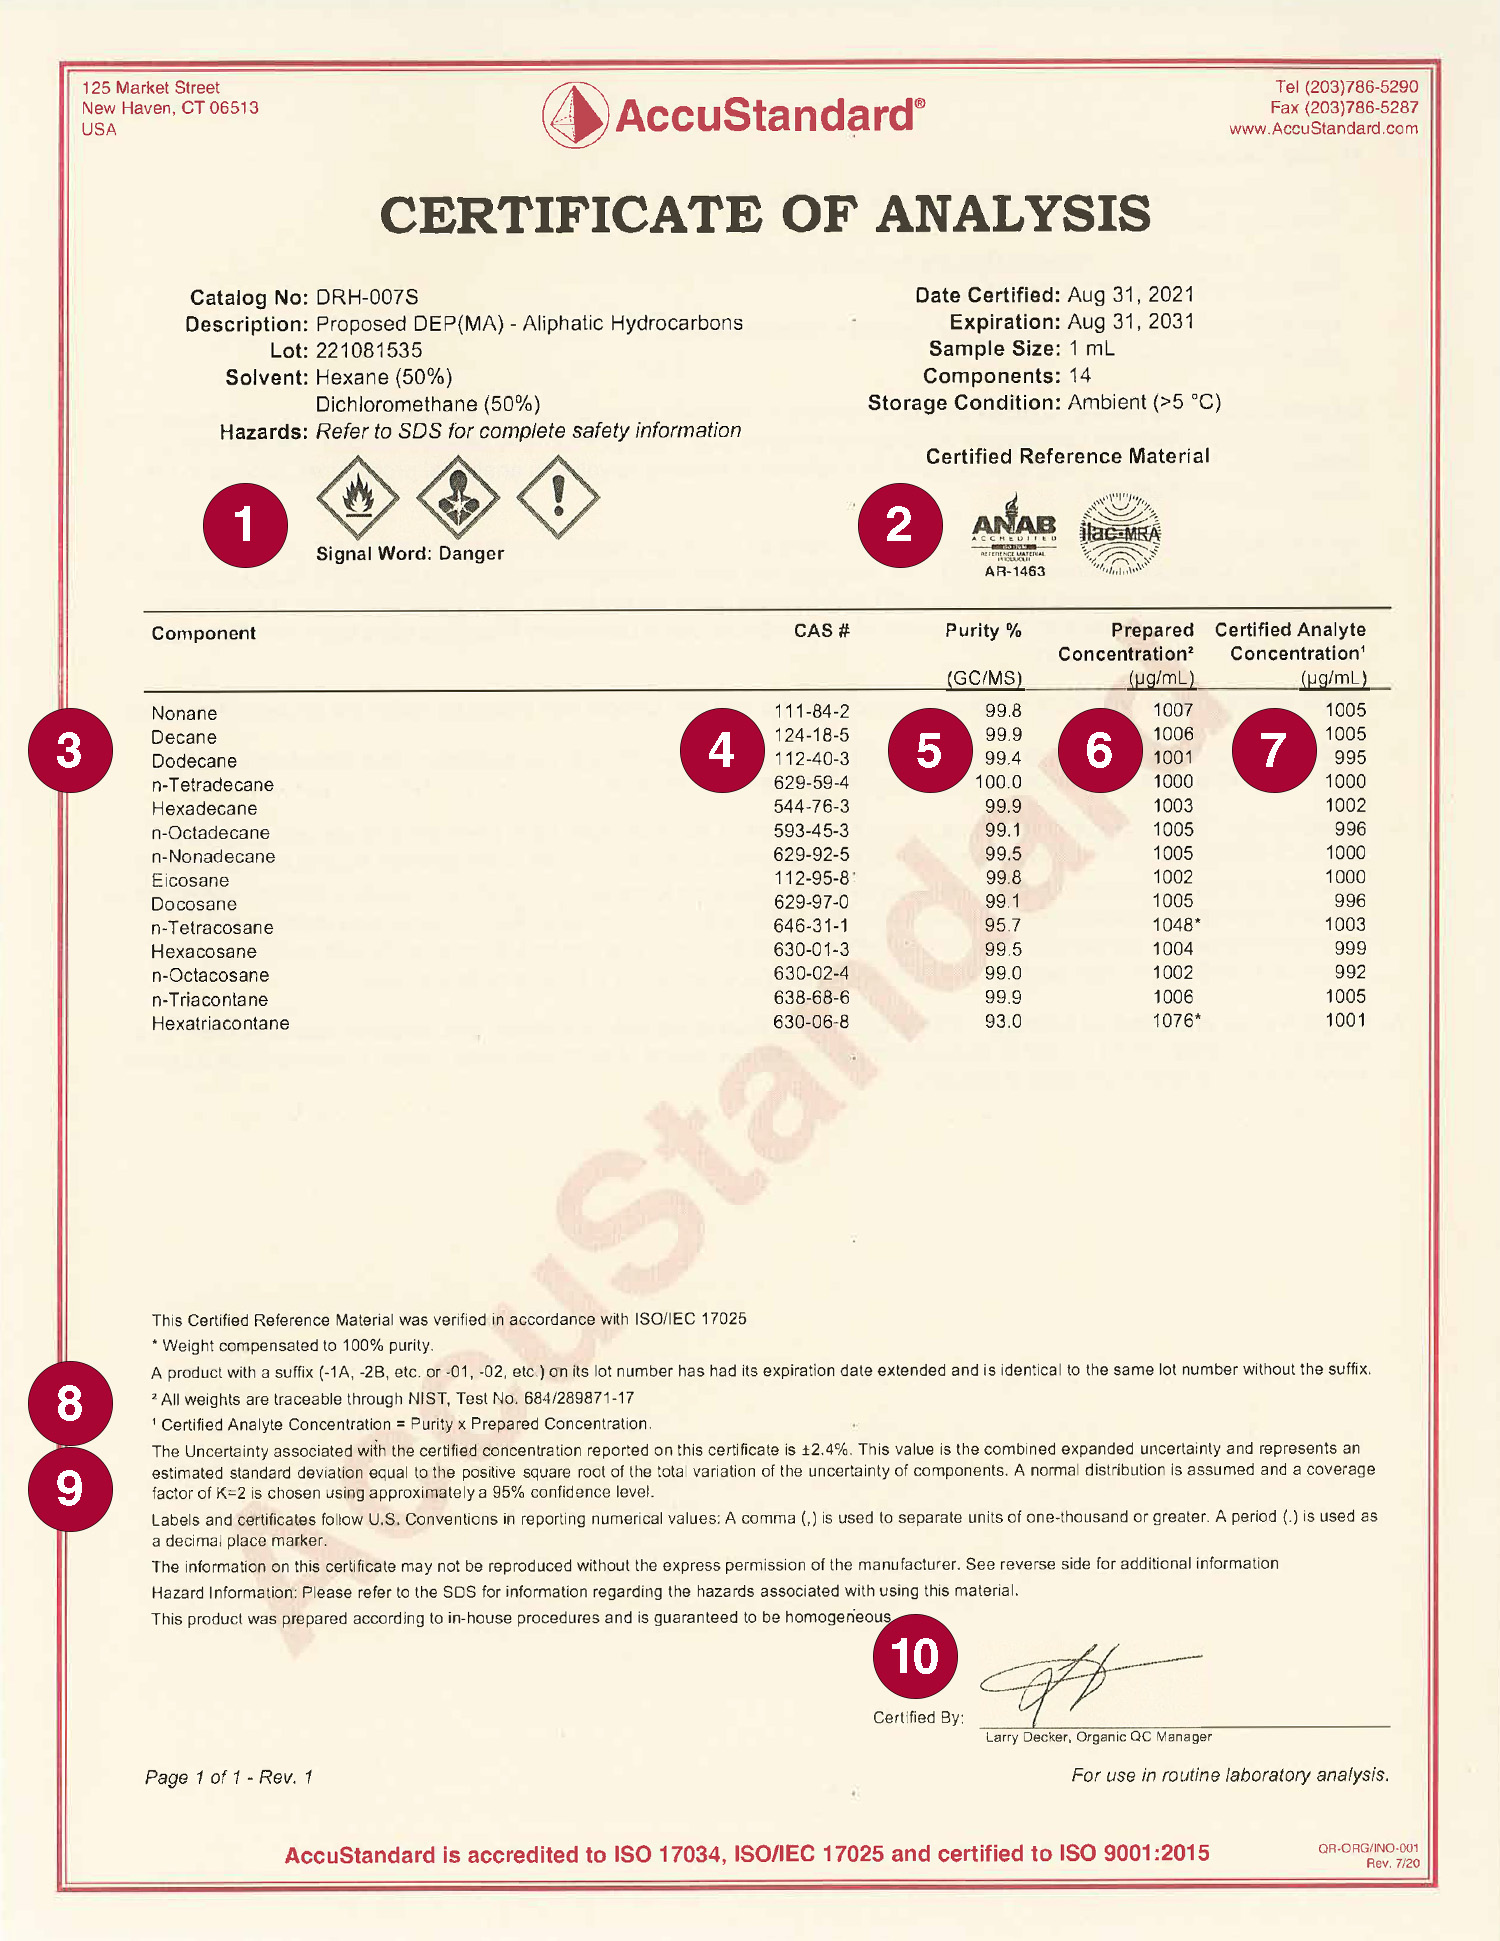 BUREAU OF ANALYSED SAMPLES LTD Certified Reference